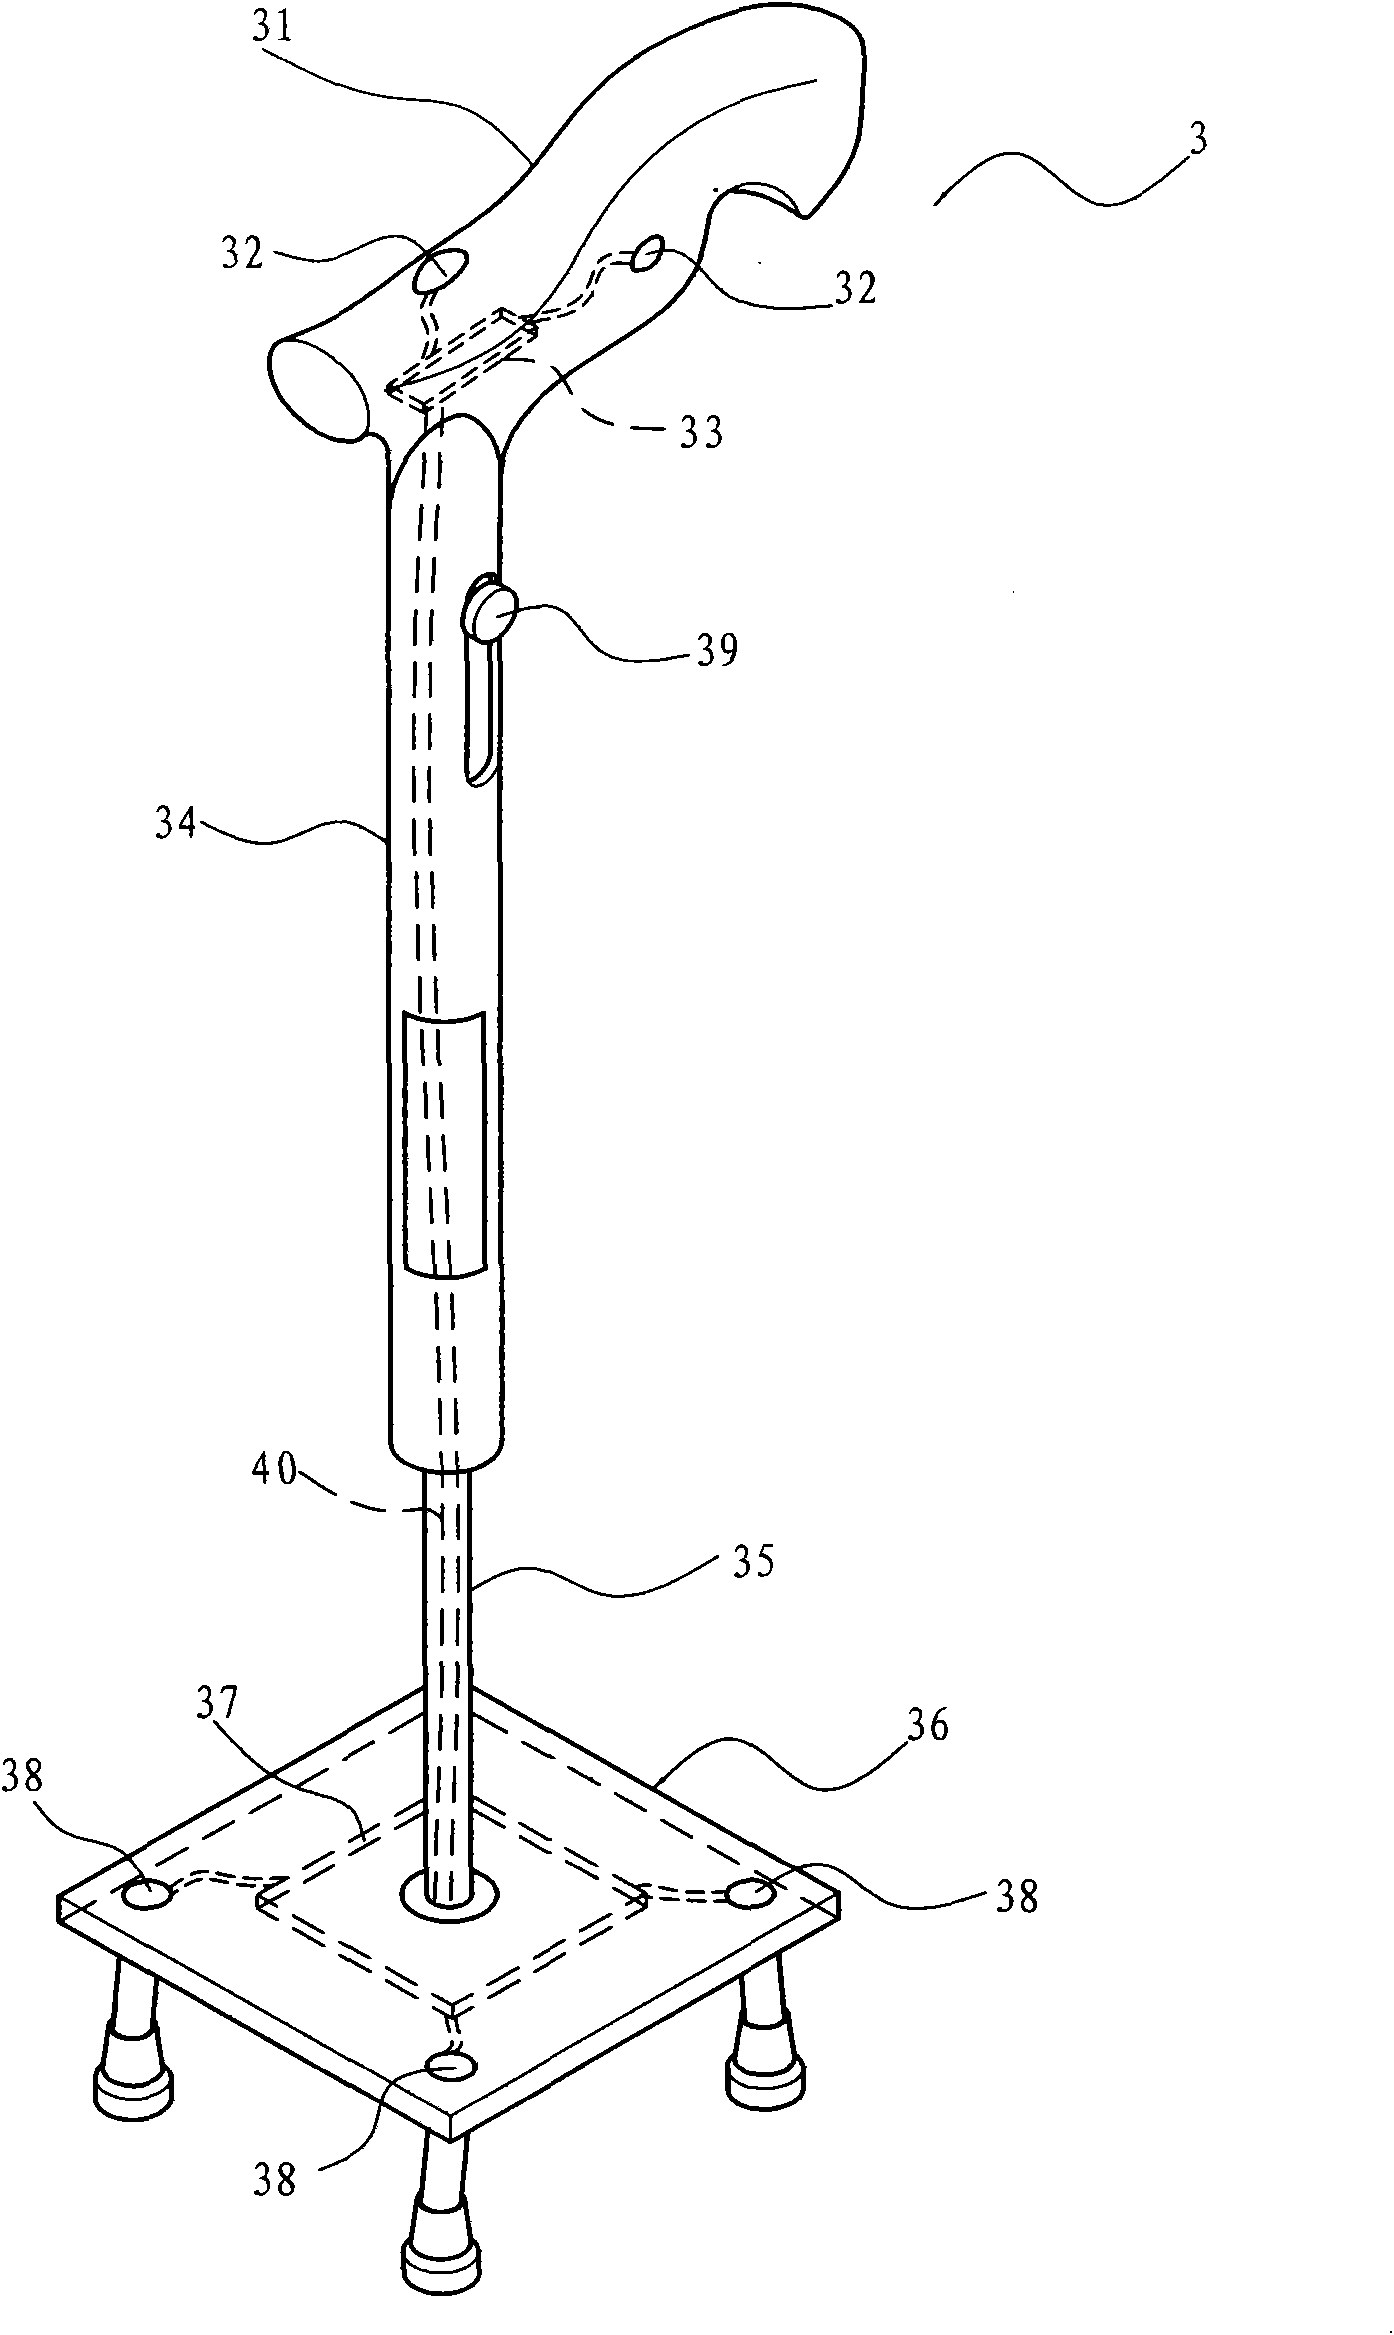 Crutch with controllable rod length through pressure sensing and method thereof for controlling rod length